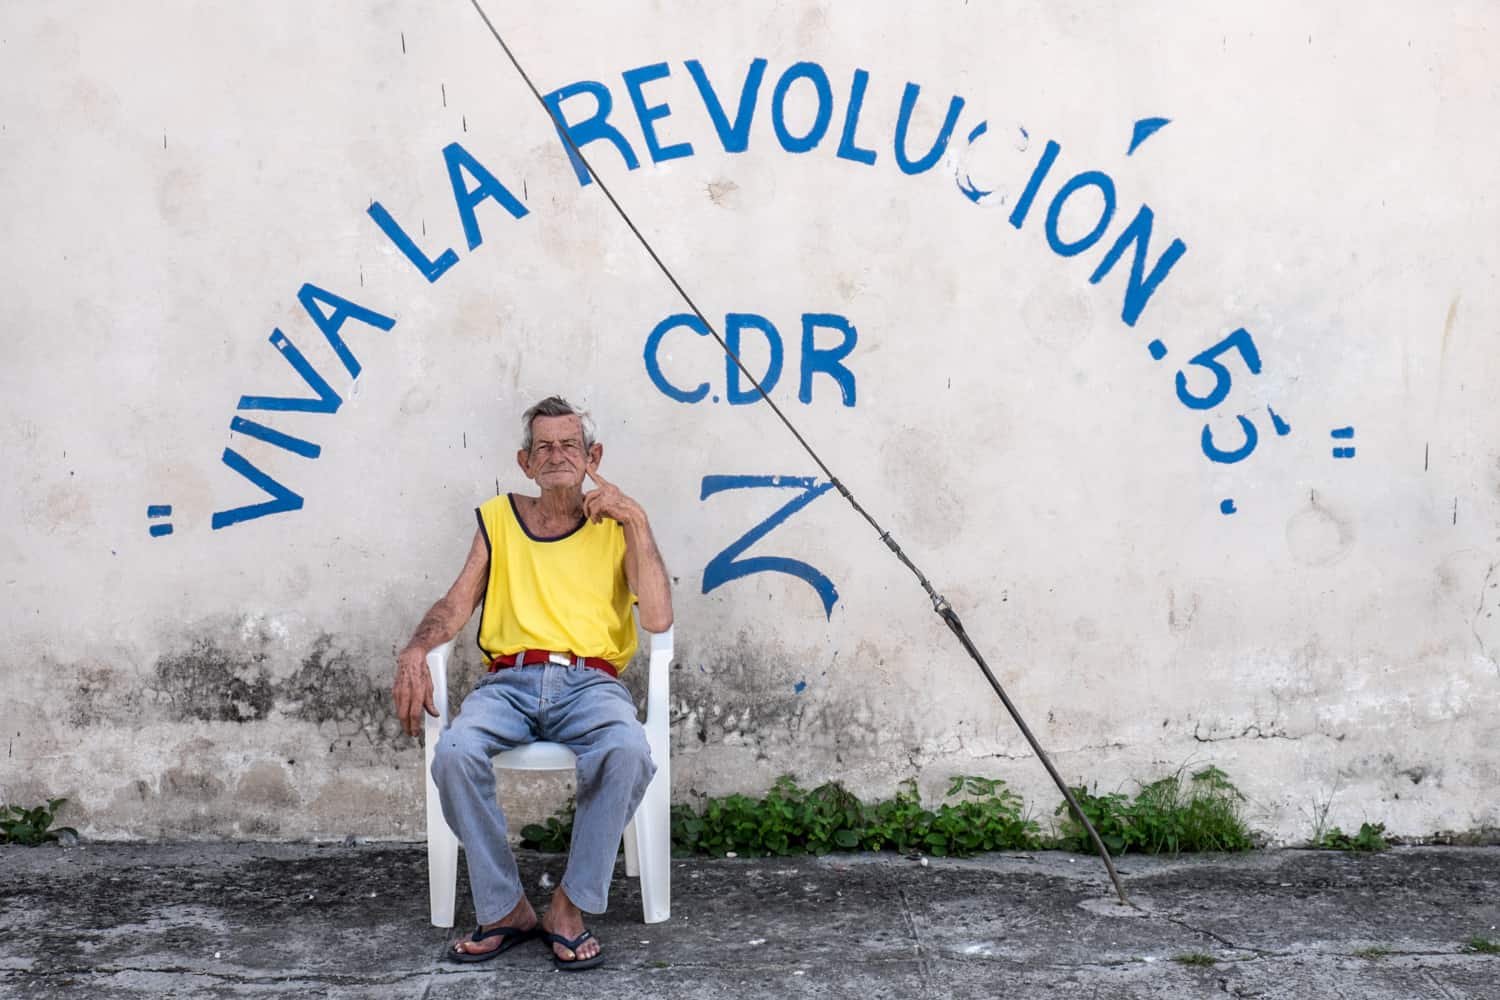 A Cuban man in a yellow vest sits in a white chair in front of a wall with the blue painted words: "Viva La Revolucion 55" CDR Z.